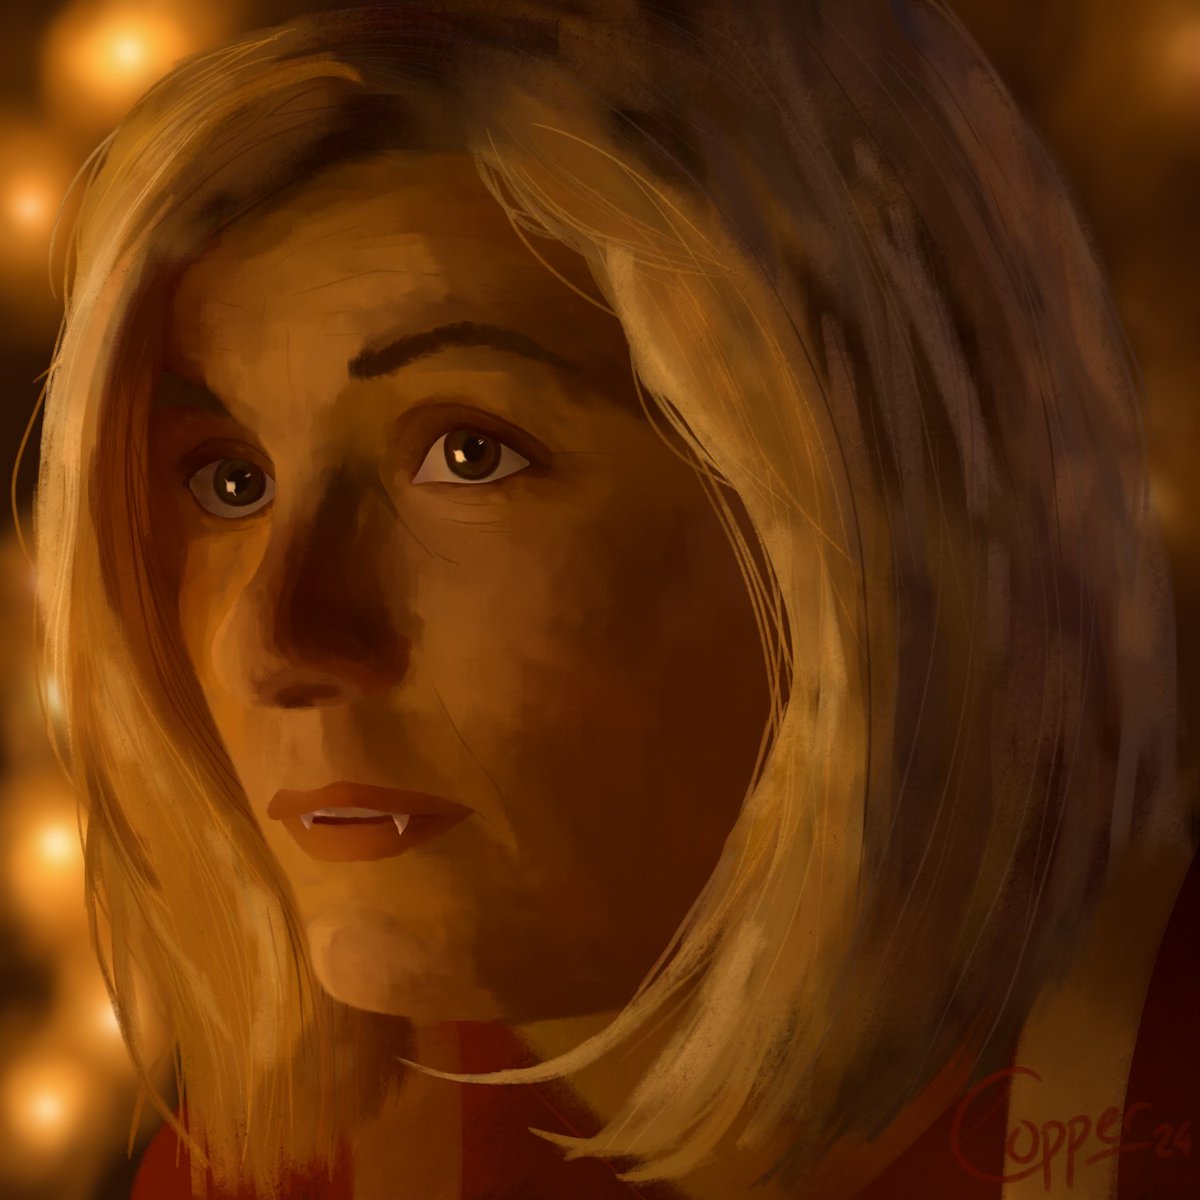 i reckon im getting the hang of this :D
(2 hours 5 mins)

rts appreciated <3
#DoctorWho #DoctorWhoFanart #thirteenthdoctor #13thdoctor #JodieWhittaker